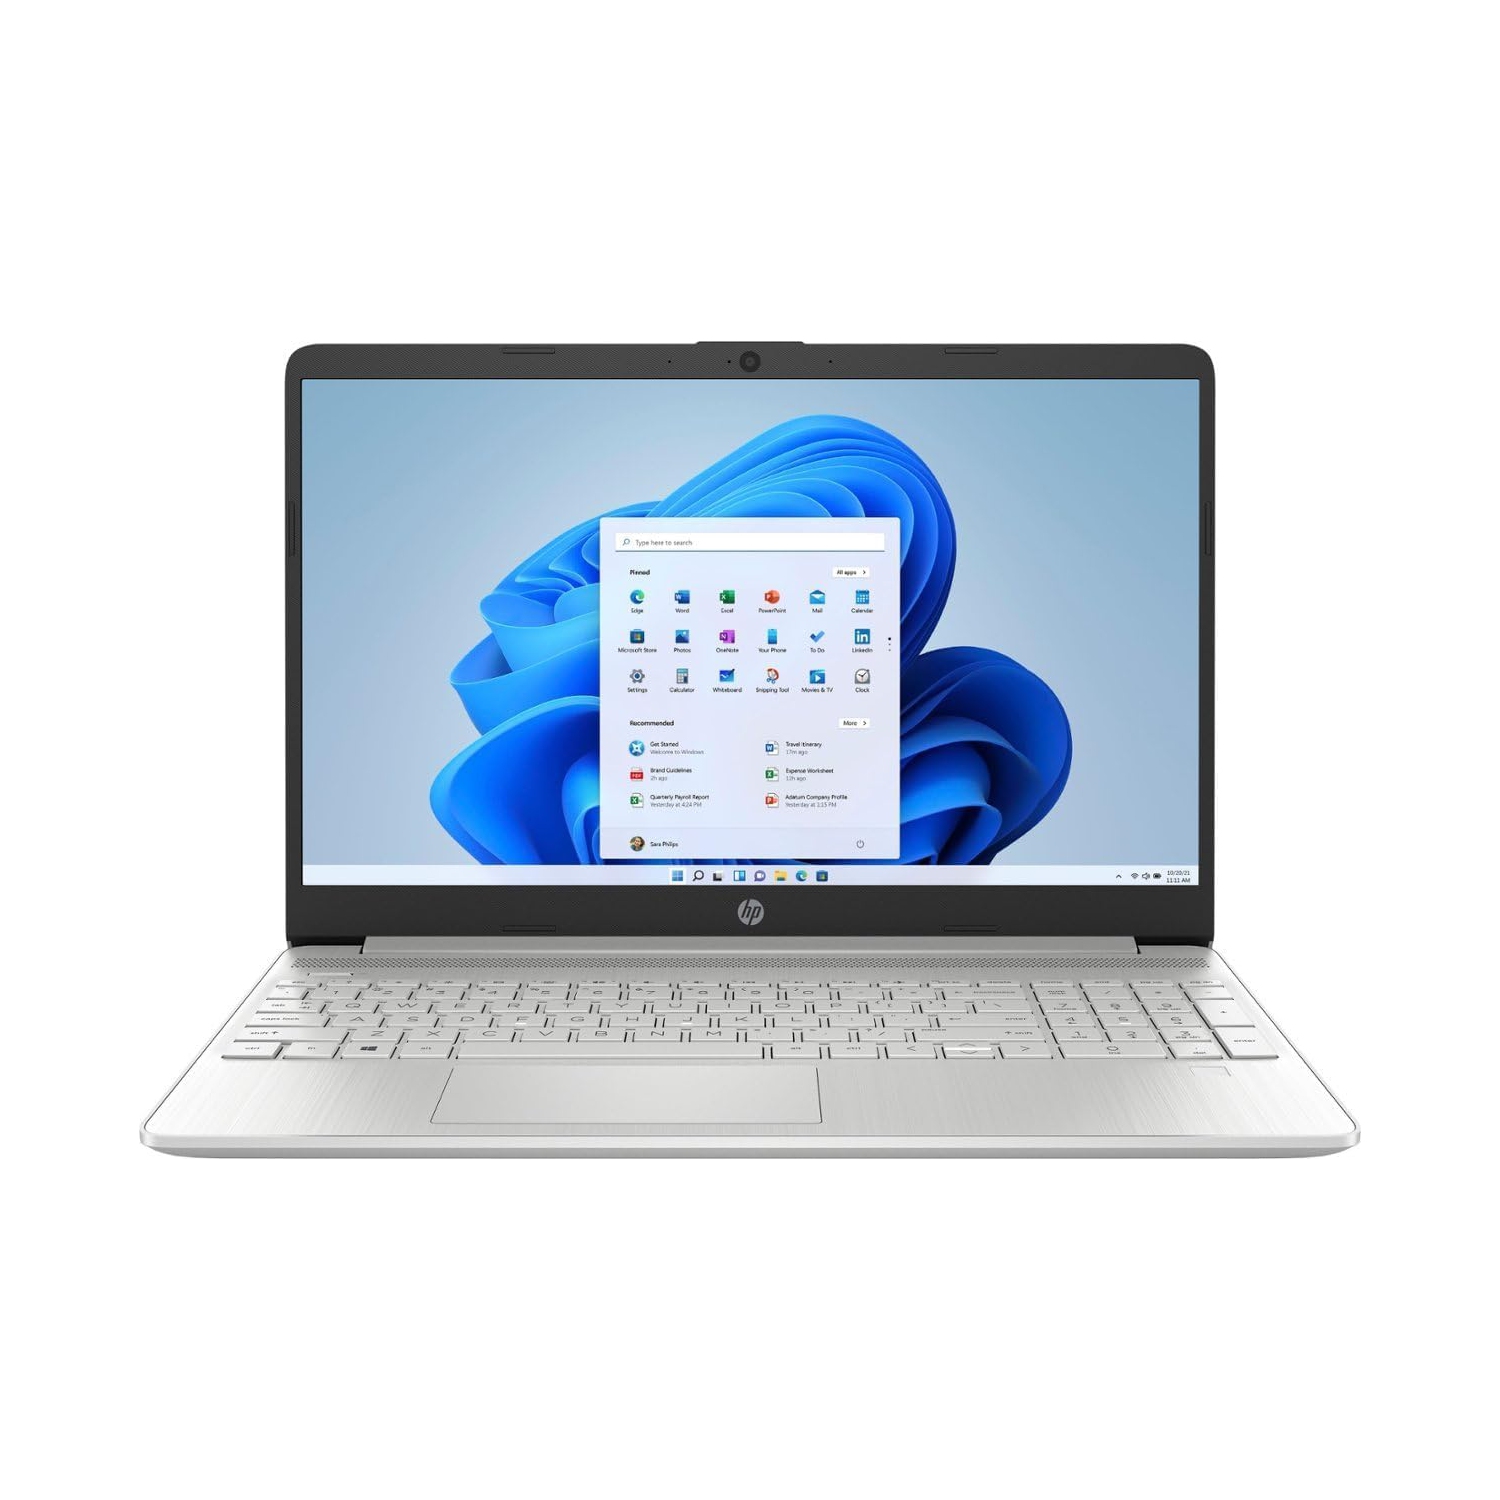 HP - 15.6" Touch-Screen Laptop - Intel Core 6-Core i3 -1215u Up to 4.4GHz - 8GB Memory - 256GB SSD - Natural Silver, Intel UHD Graphics, Fingerprint Reader, Windows 11 Home